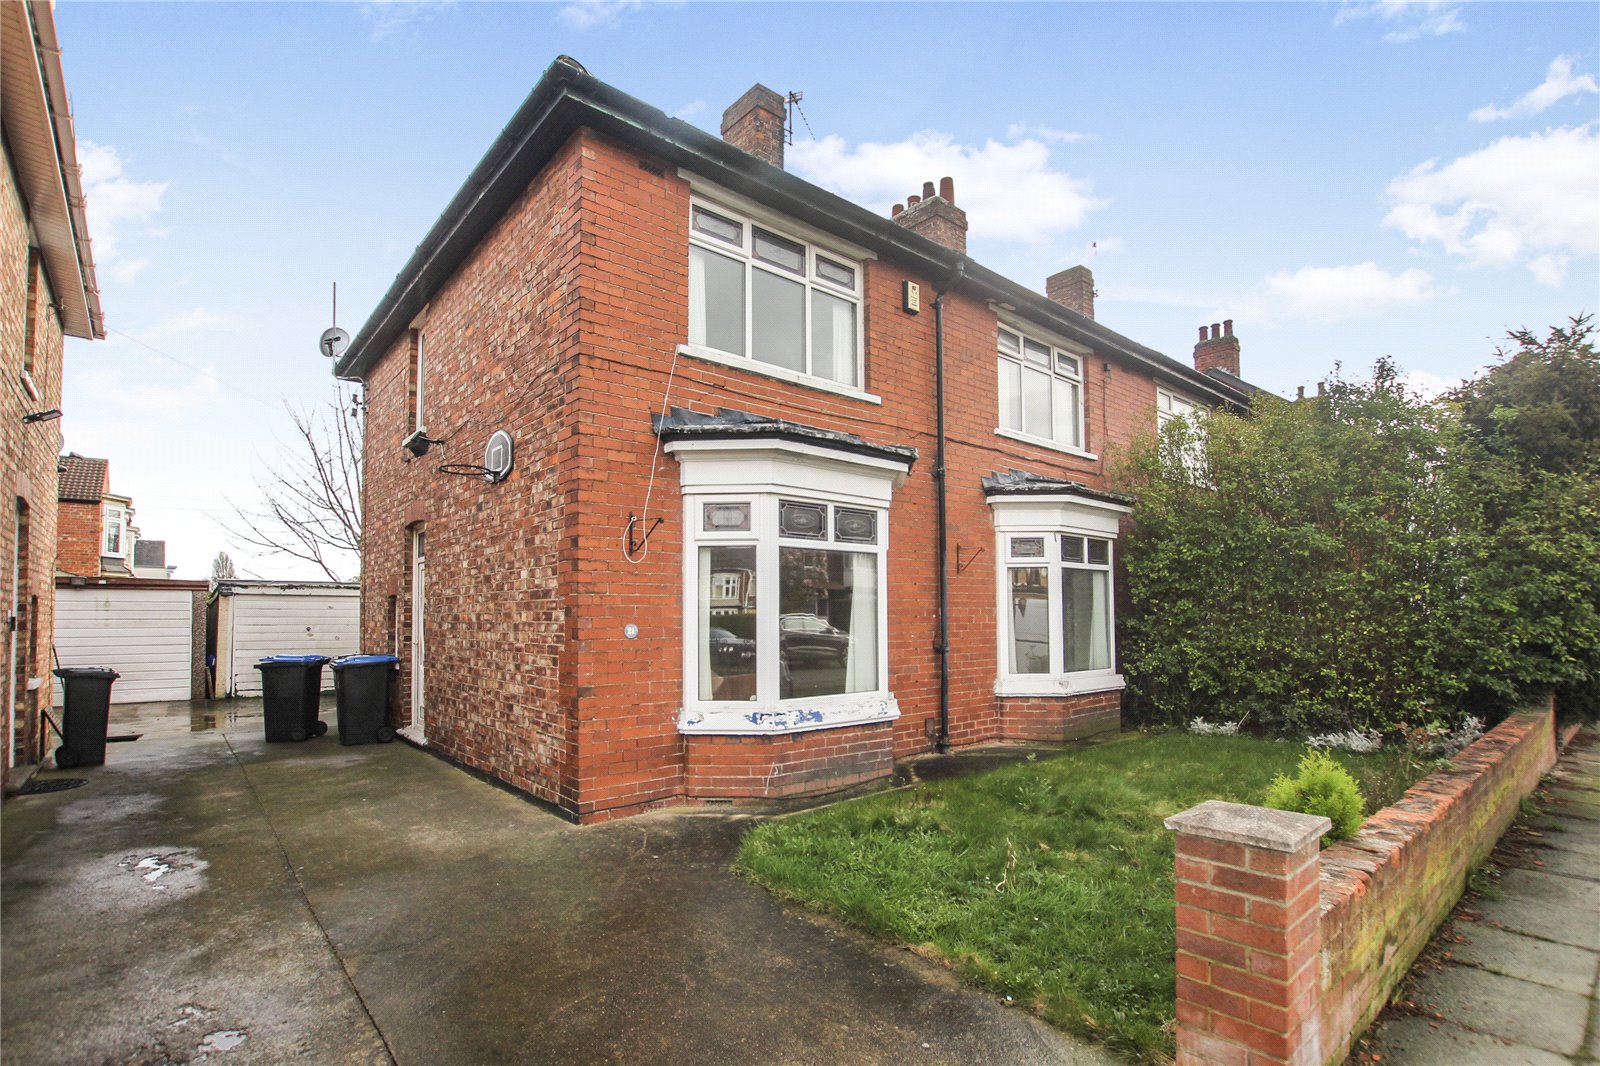 3 bed house for sale in Eton Road, Linthorpe  - Property Image 1